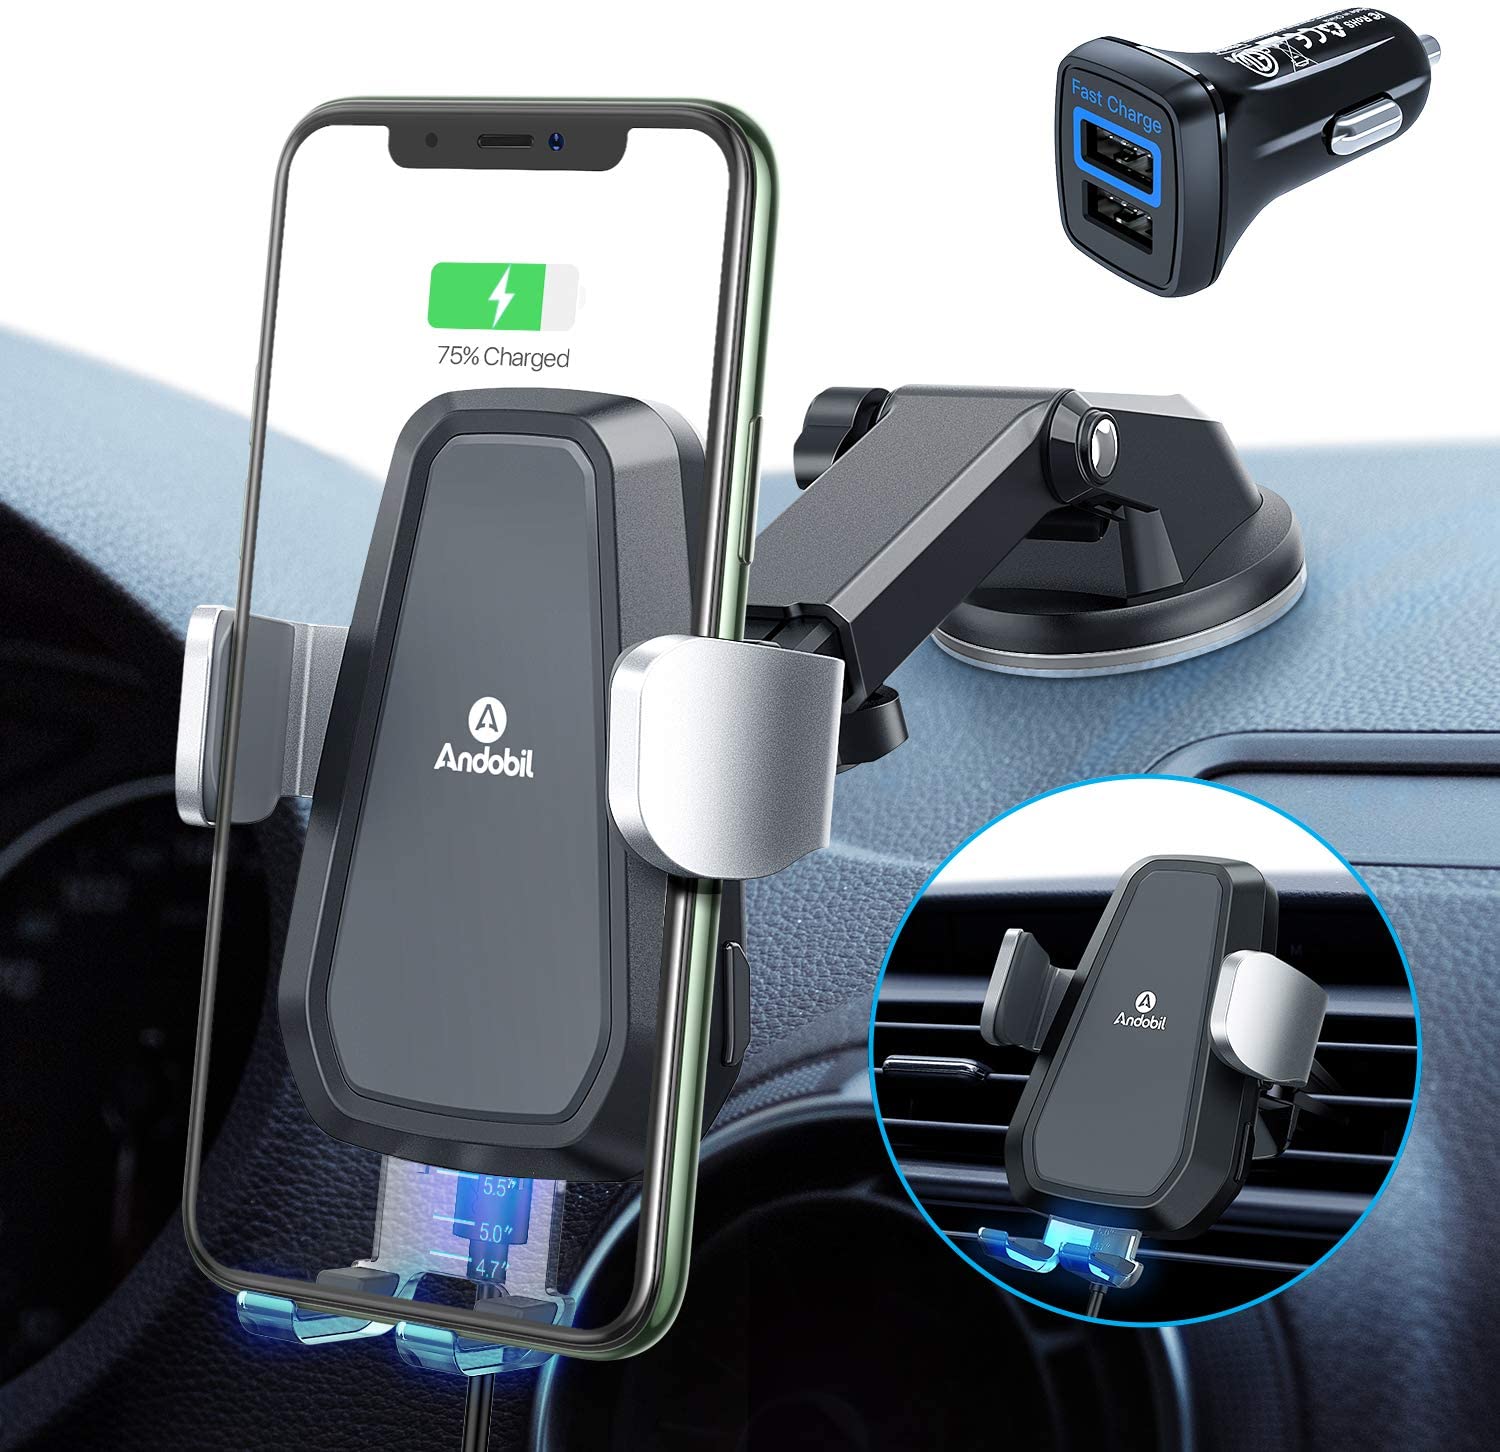 Andobil auto-clamping iPhone car mount + wireless charger. ($50)